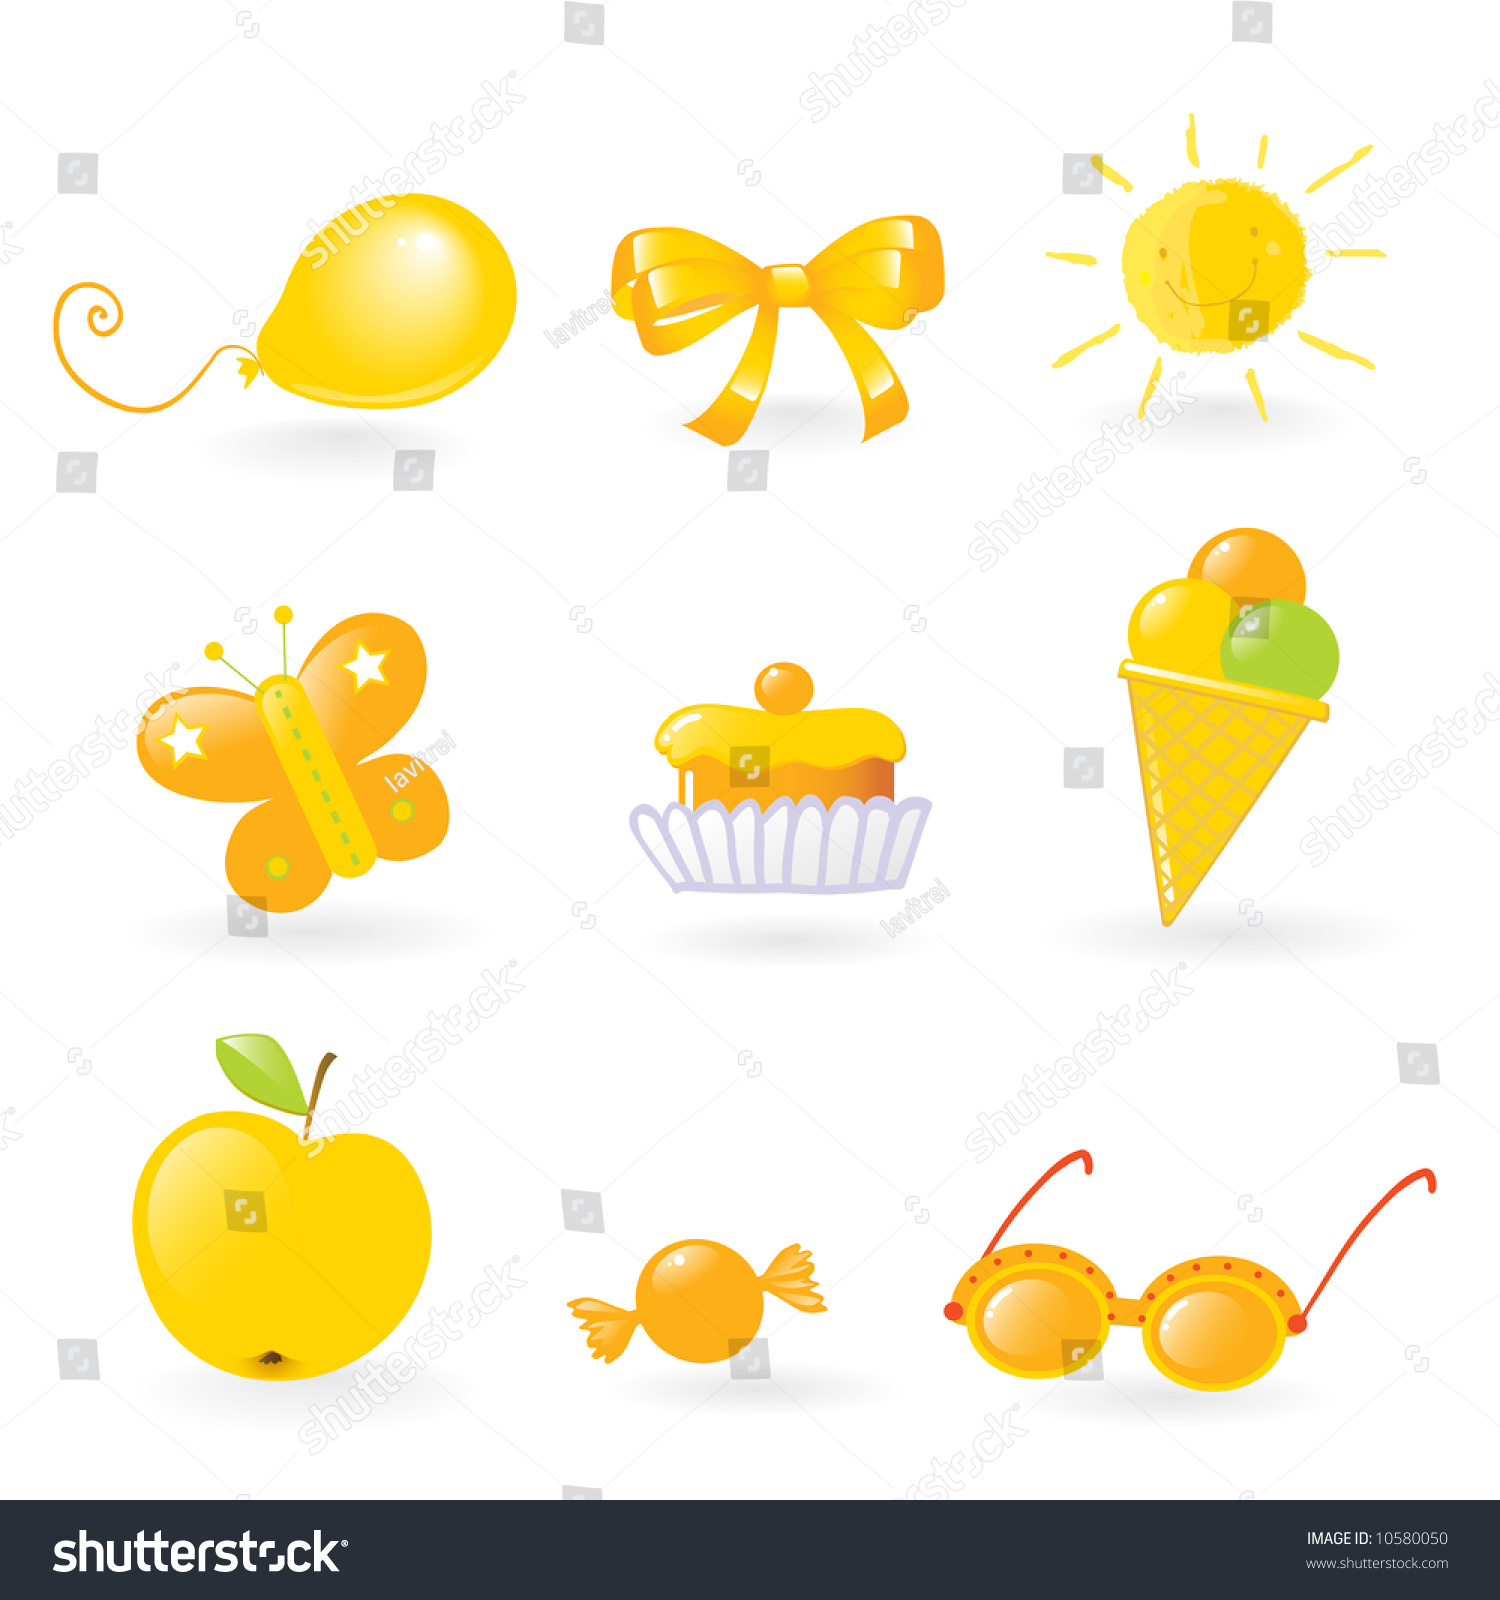 clipart yellow objects - photo #11